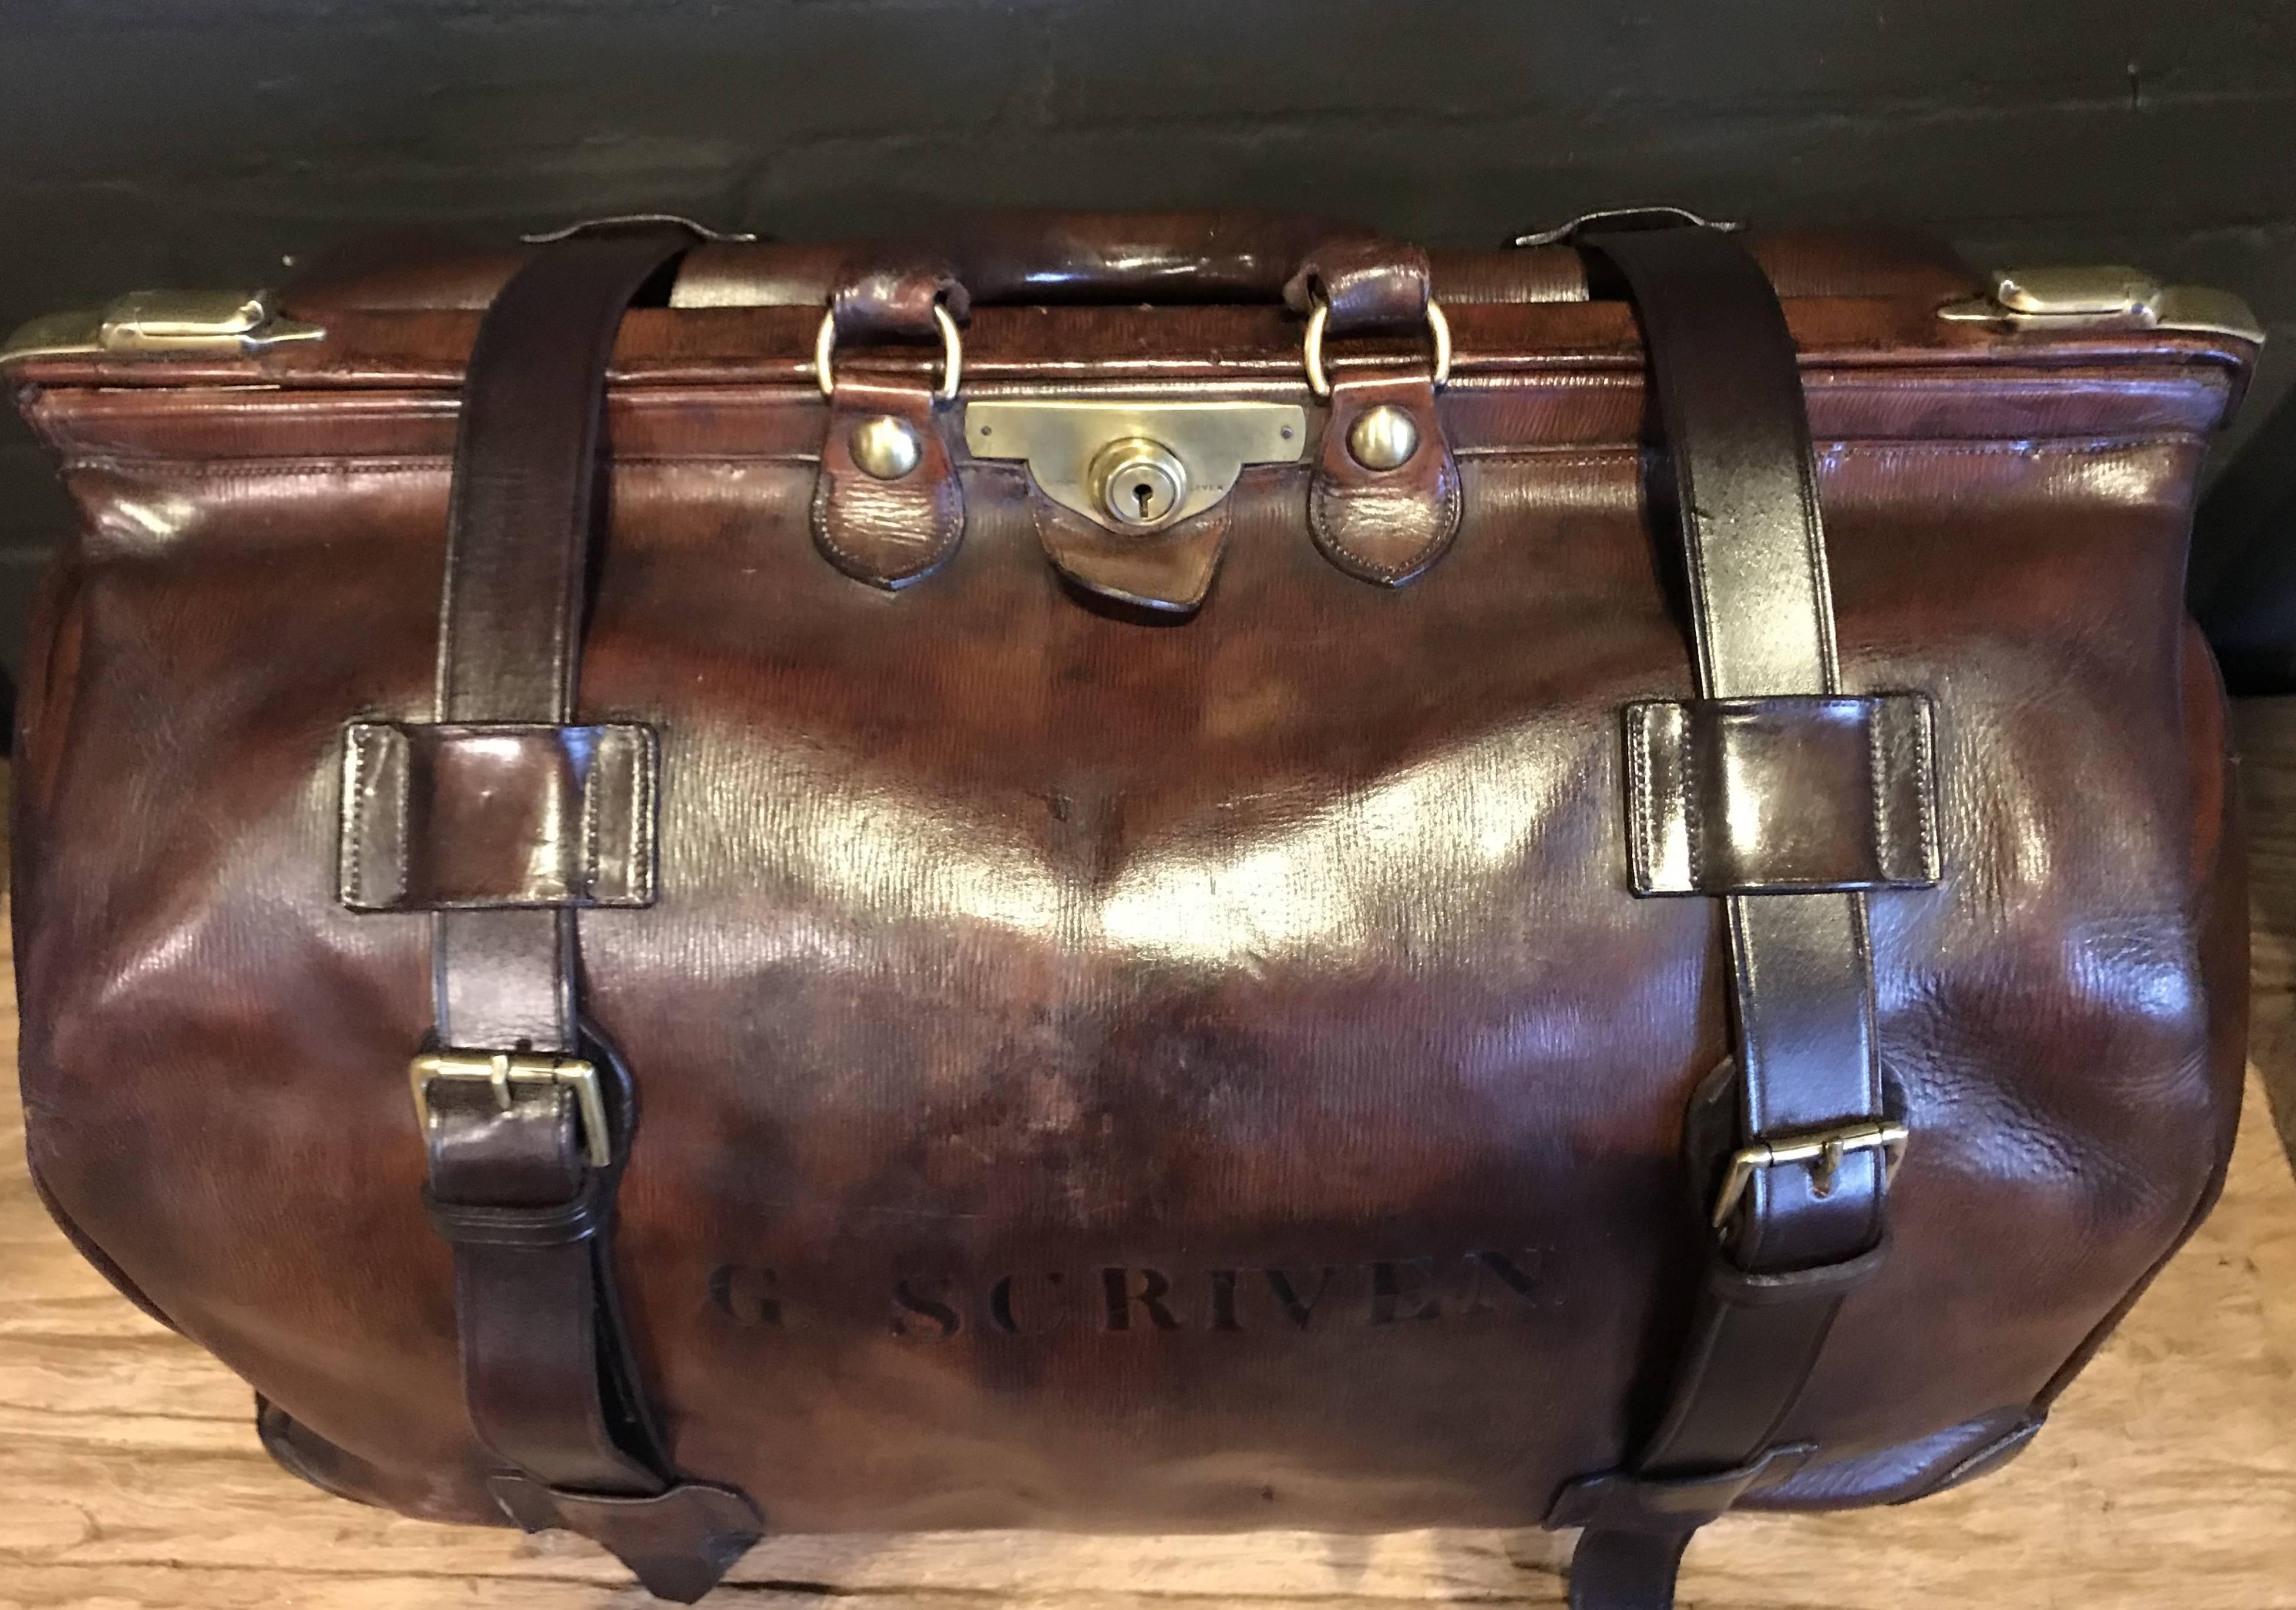 Gladstone bag named after William Ewart Gladstone (1809-1898), prime minister of the UK.
Made of beautiful glossy mahogany leather with the original straps, handle, buckles and secure locks.
The bag is in a very good condition, even the bottom of